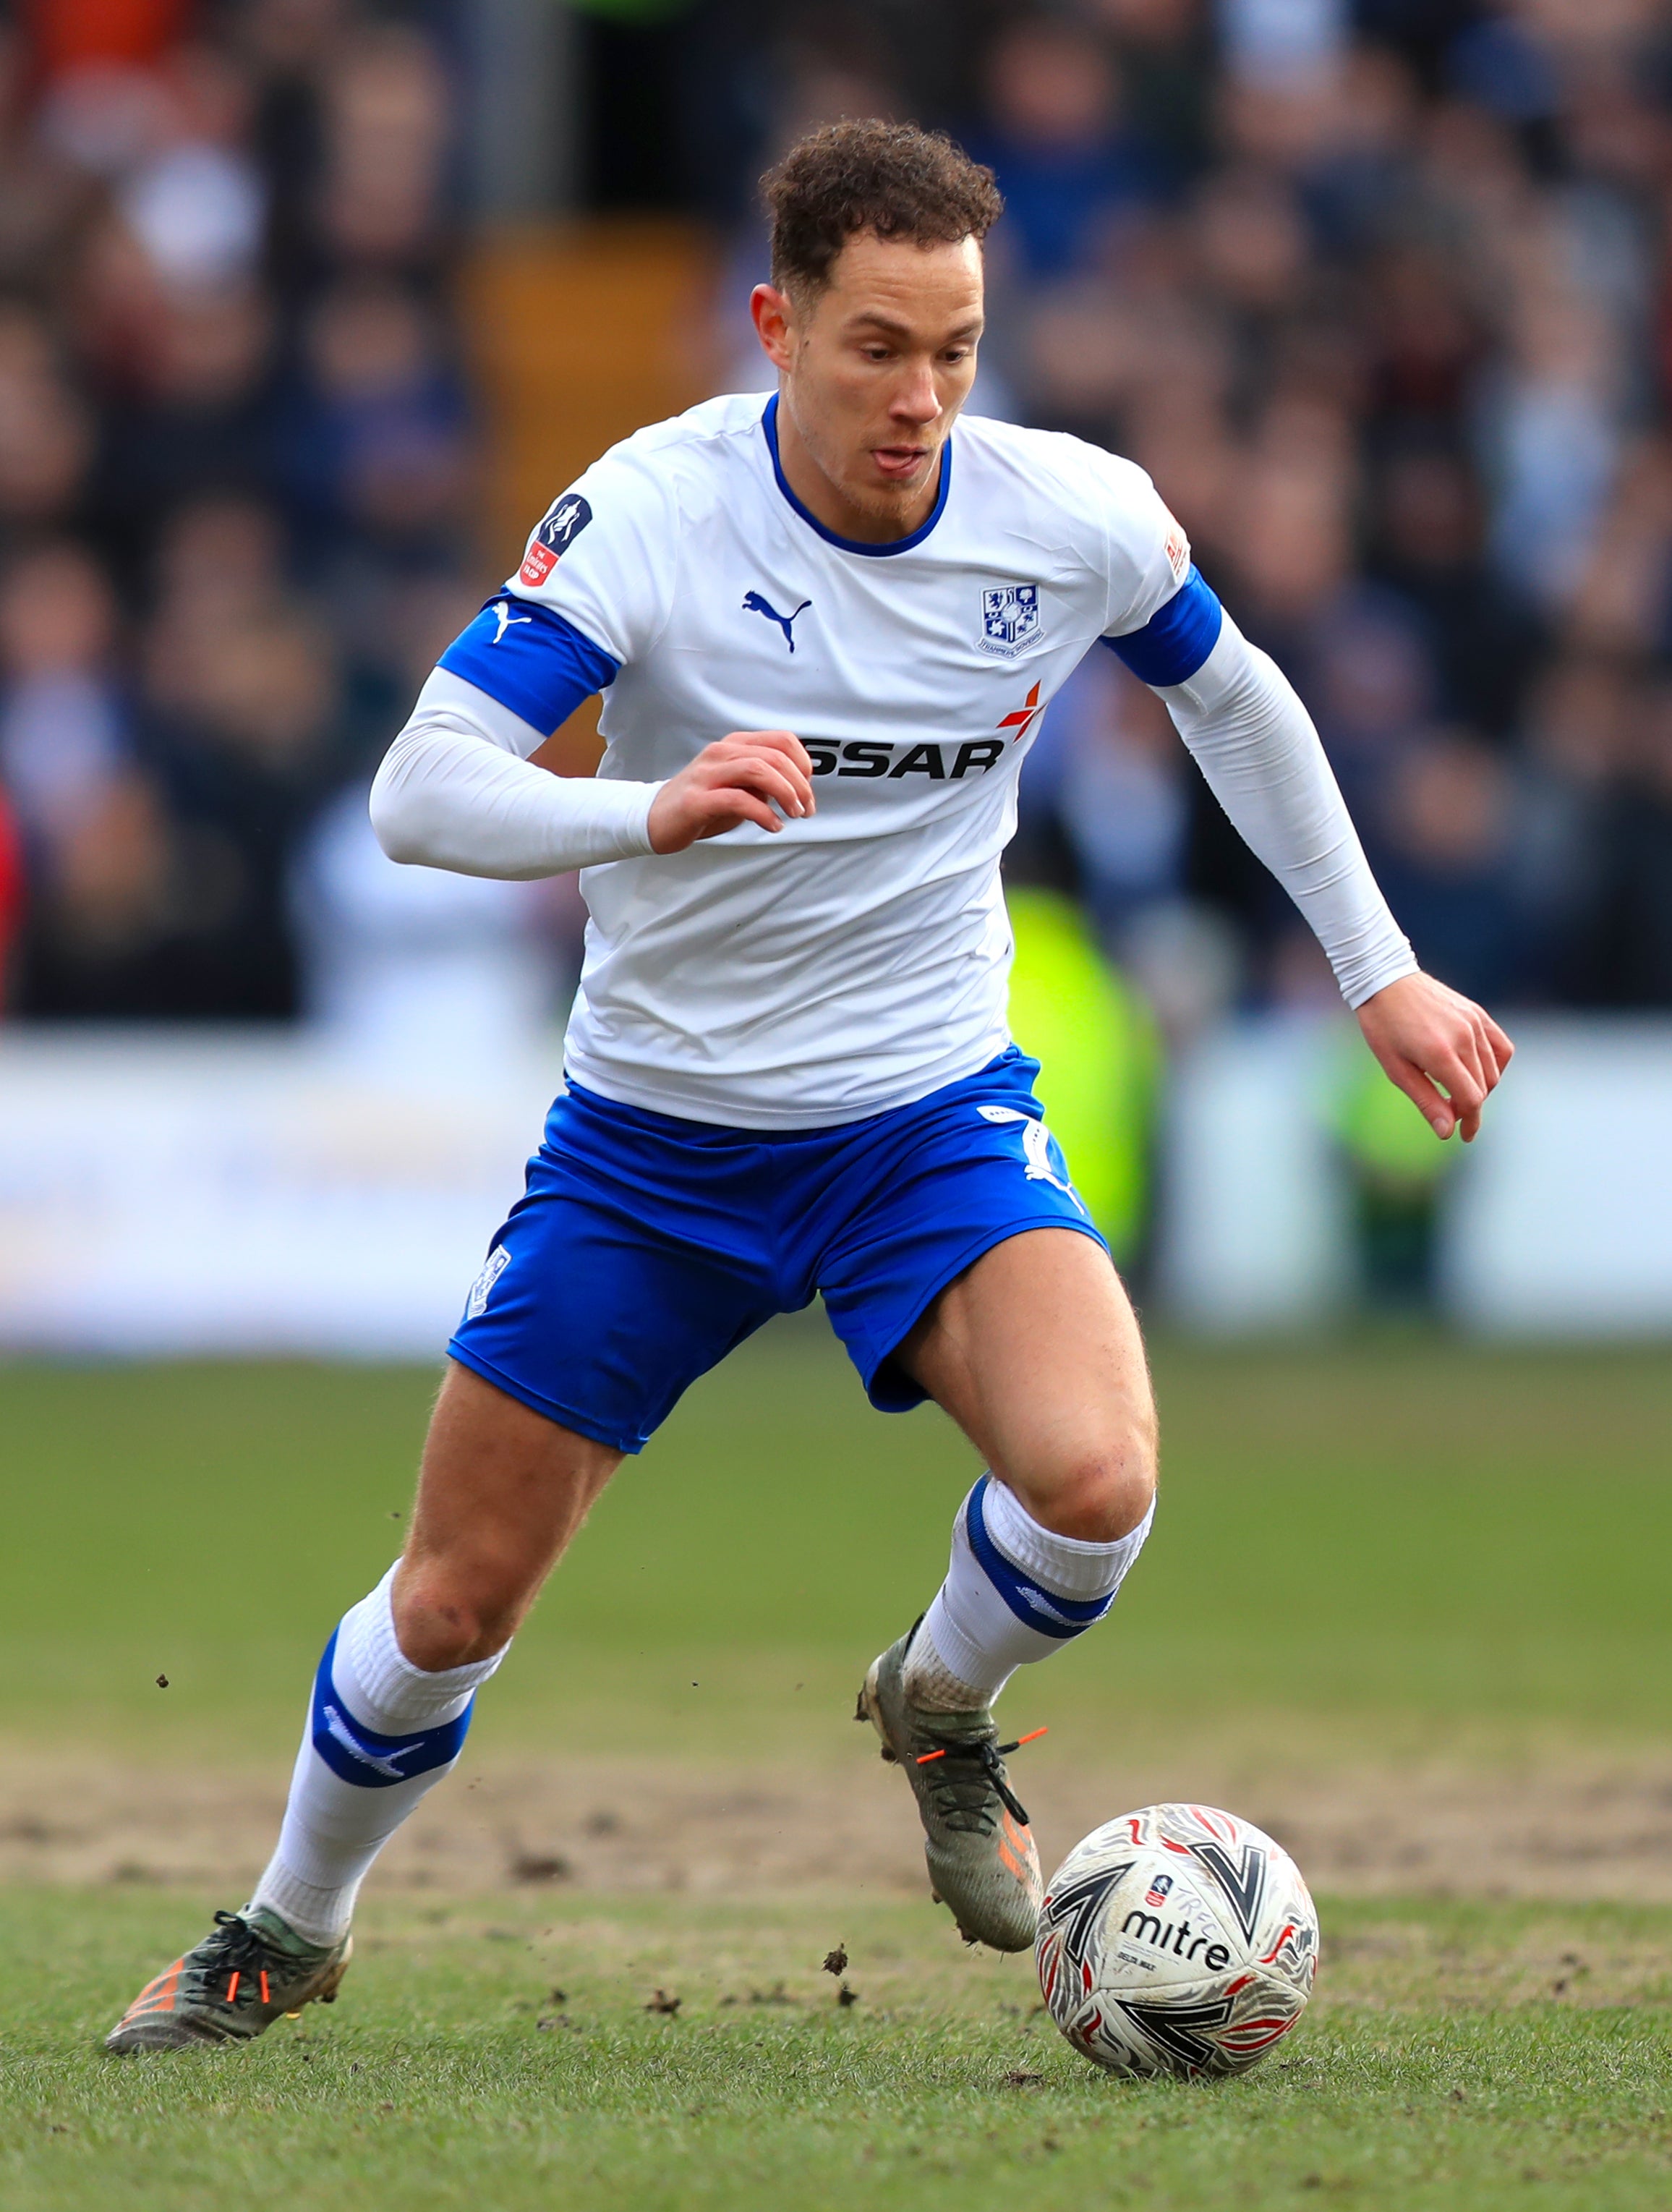 Keiron Morris on action for Tranmere Rovers.